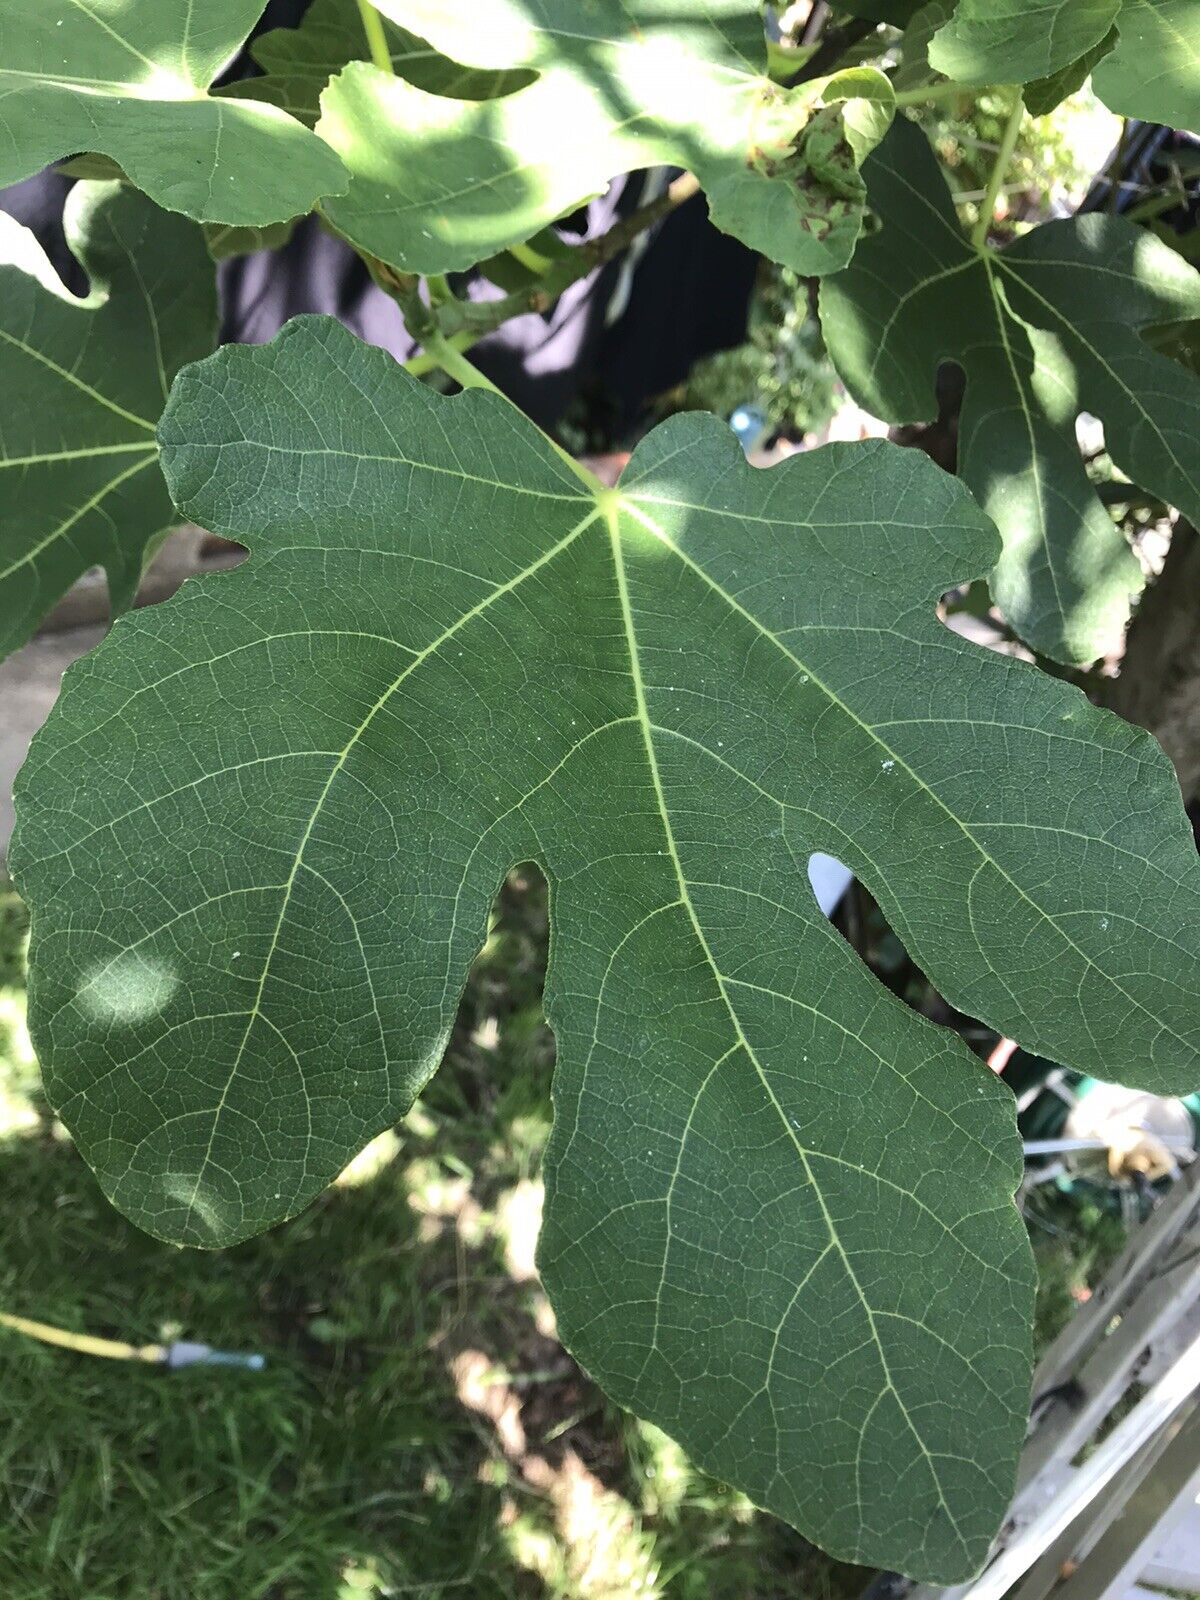 Fresh Organic Fig Leaves X5 For Cooking - Available Only May - Sept - Uk Seller